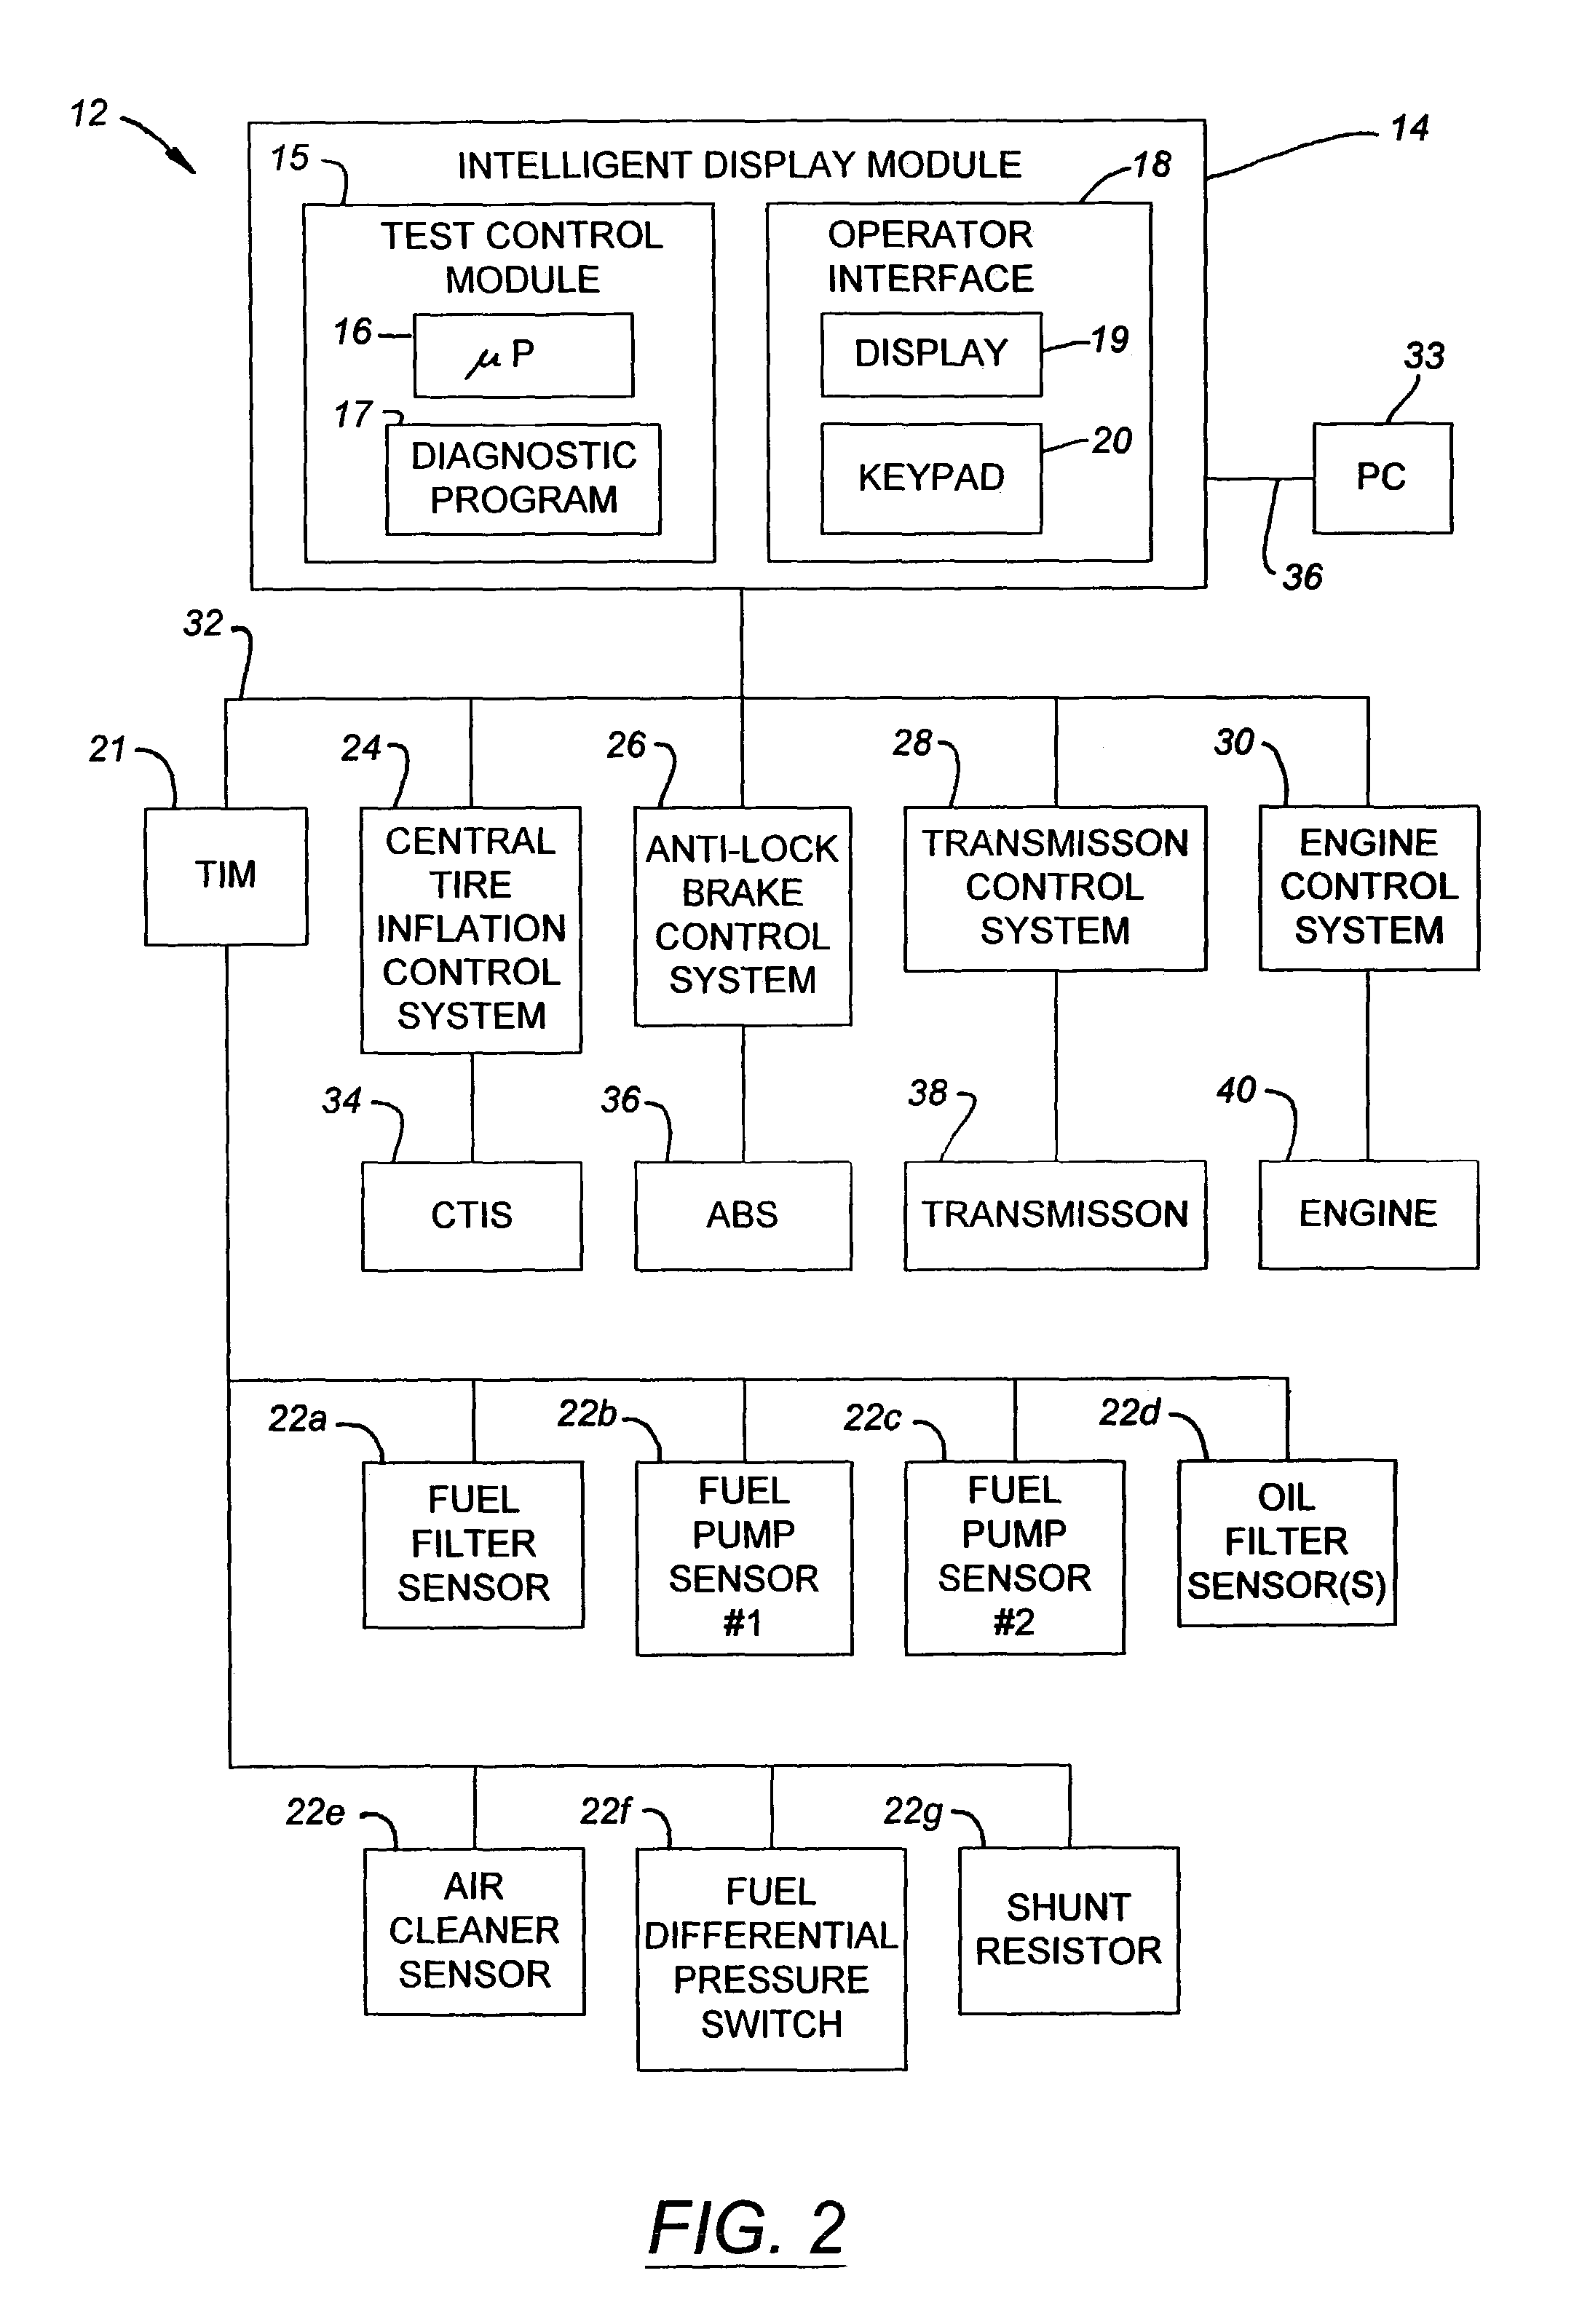 Equipment service vehicle having on-board diagnostic system